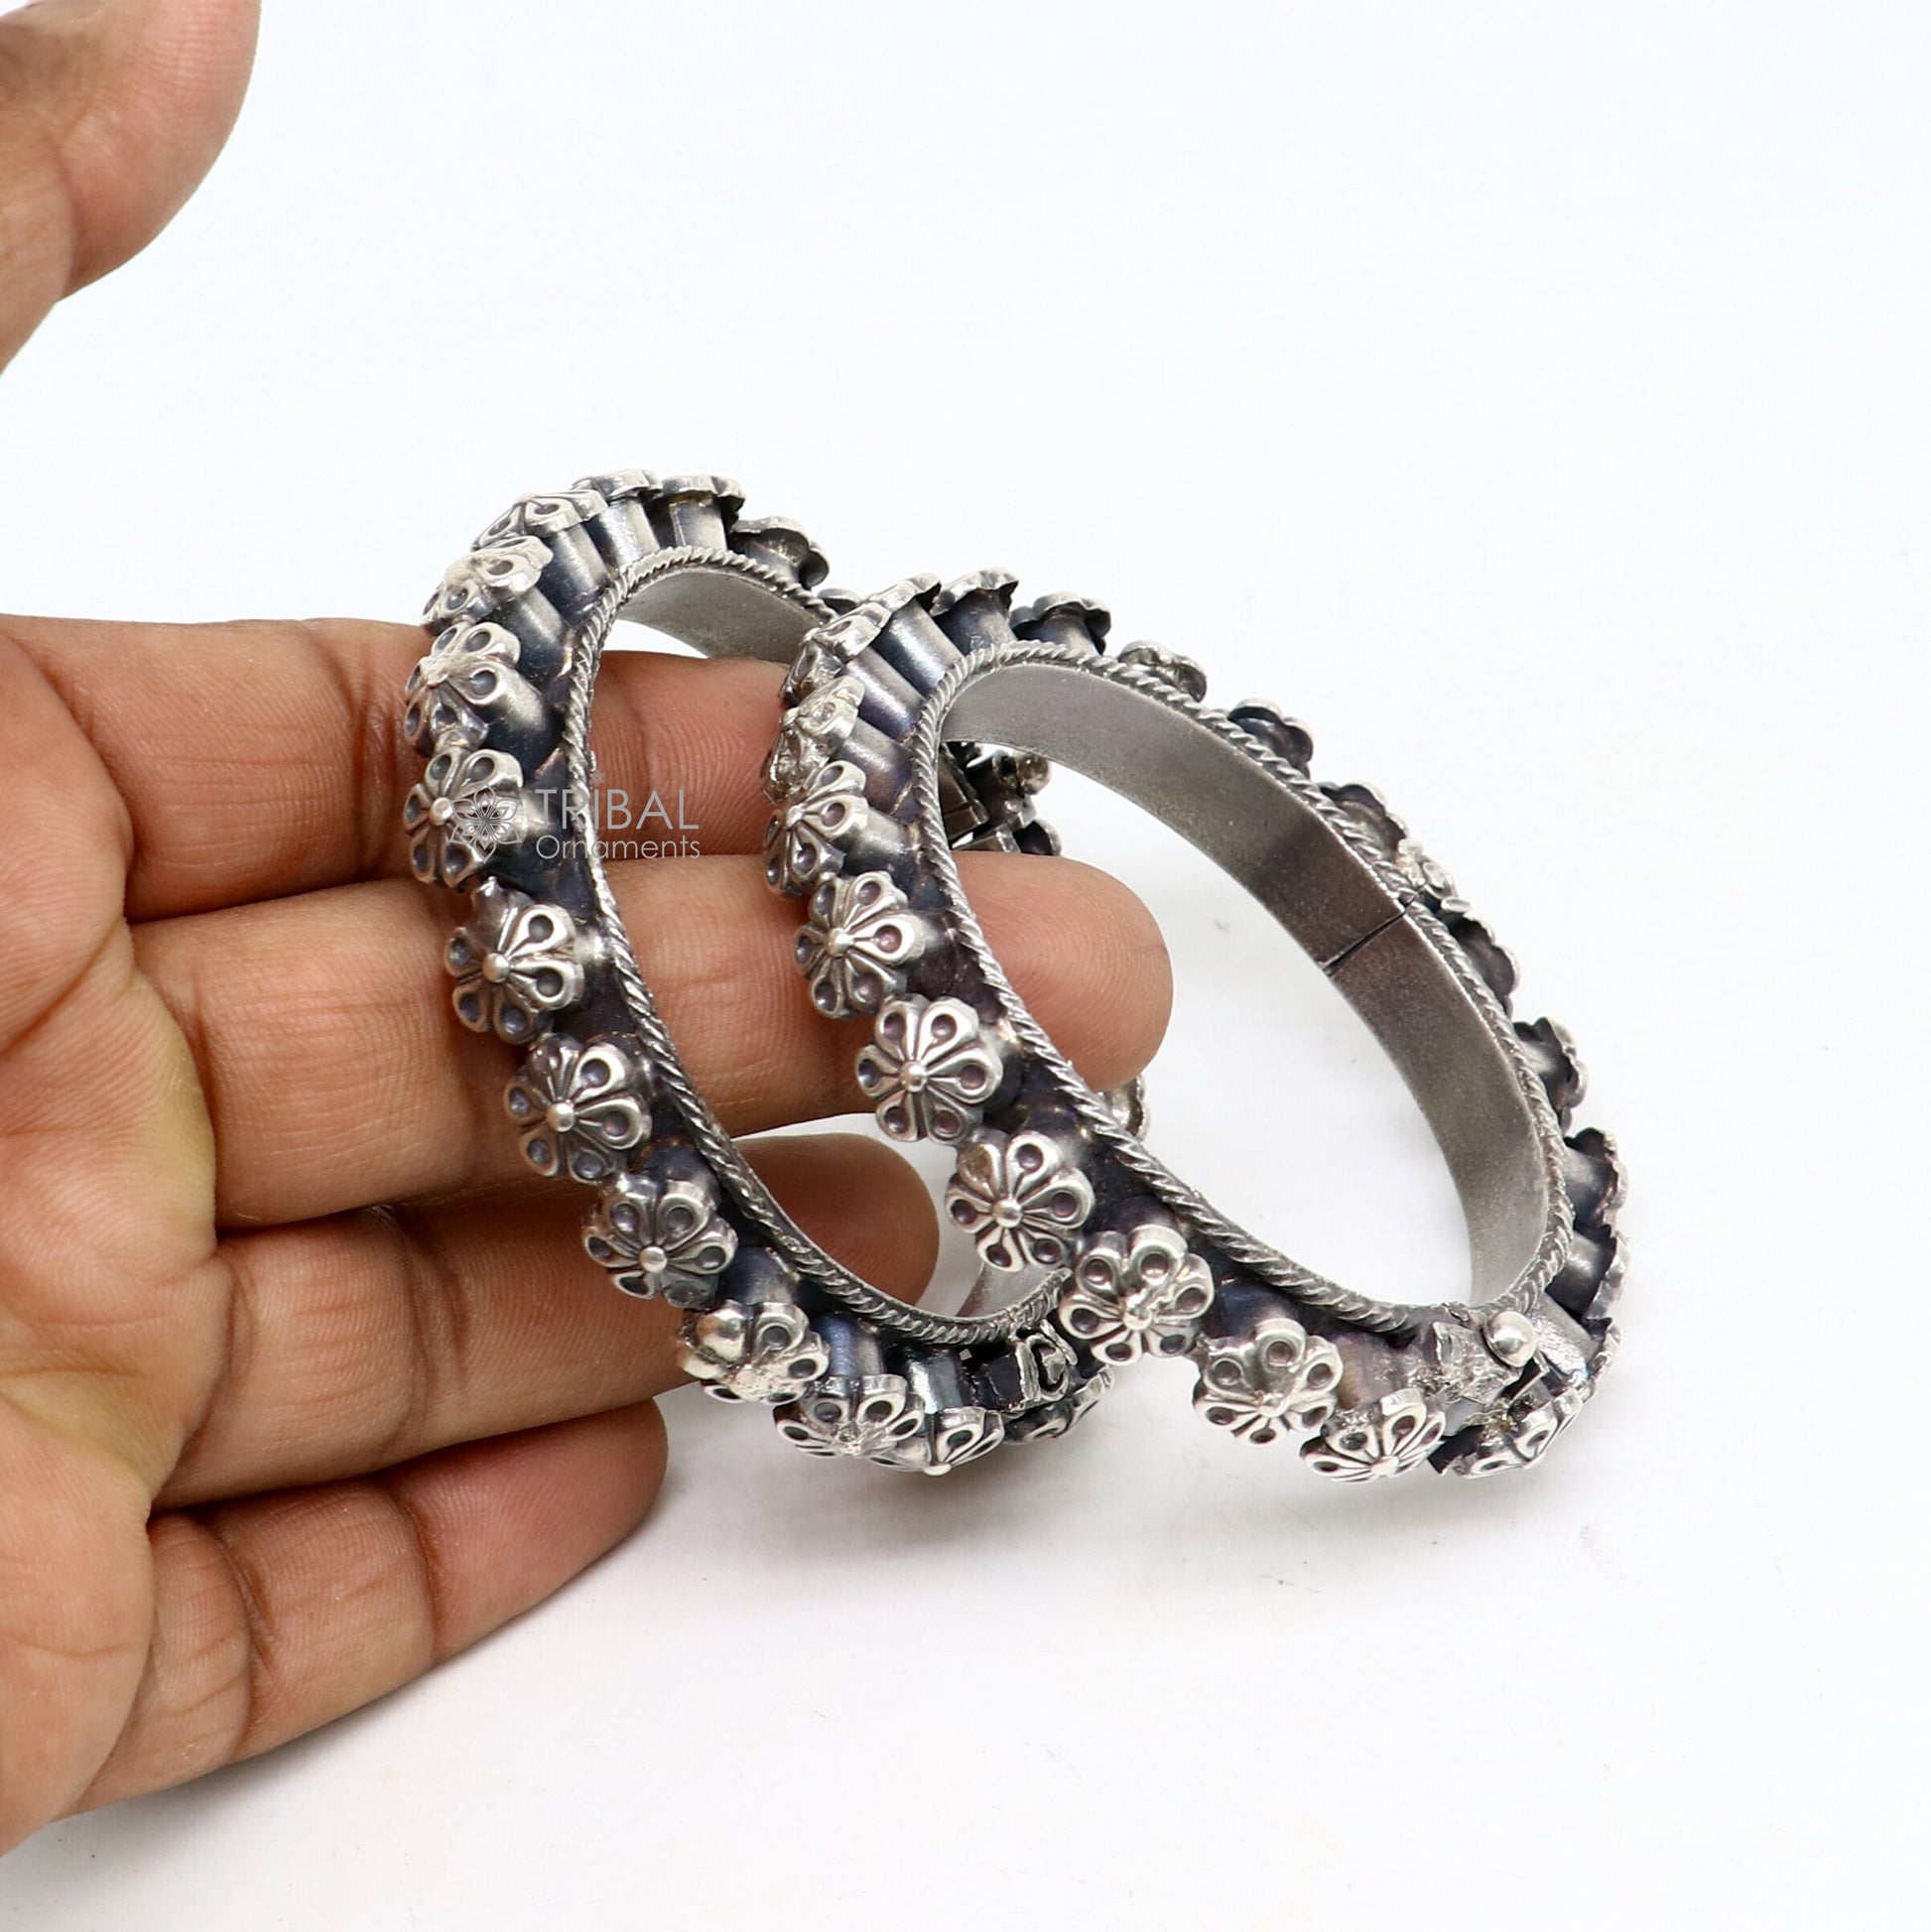 Exclusive trendy 925 sterling silver handmade unique tribal cultural bangle bracelet kada functional brides wedding jewelry nba385 - TRIBAL ORNAMENTS